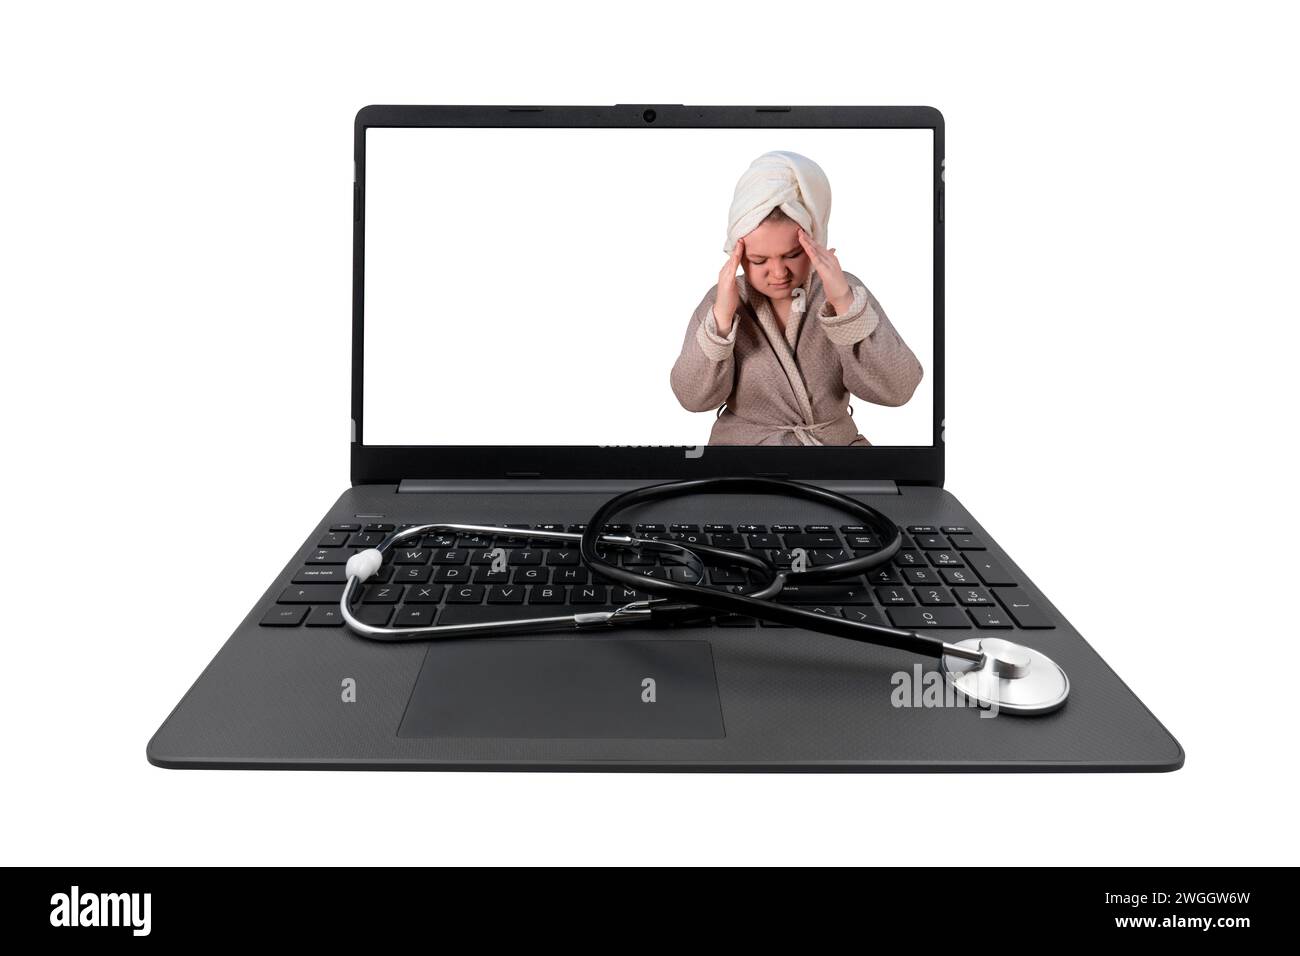 Laptop and medical stethoscope isolated on white background. On the laptop screen - a girl in a bathrobe clasped her head in her hands (headache) Stock Photo